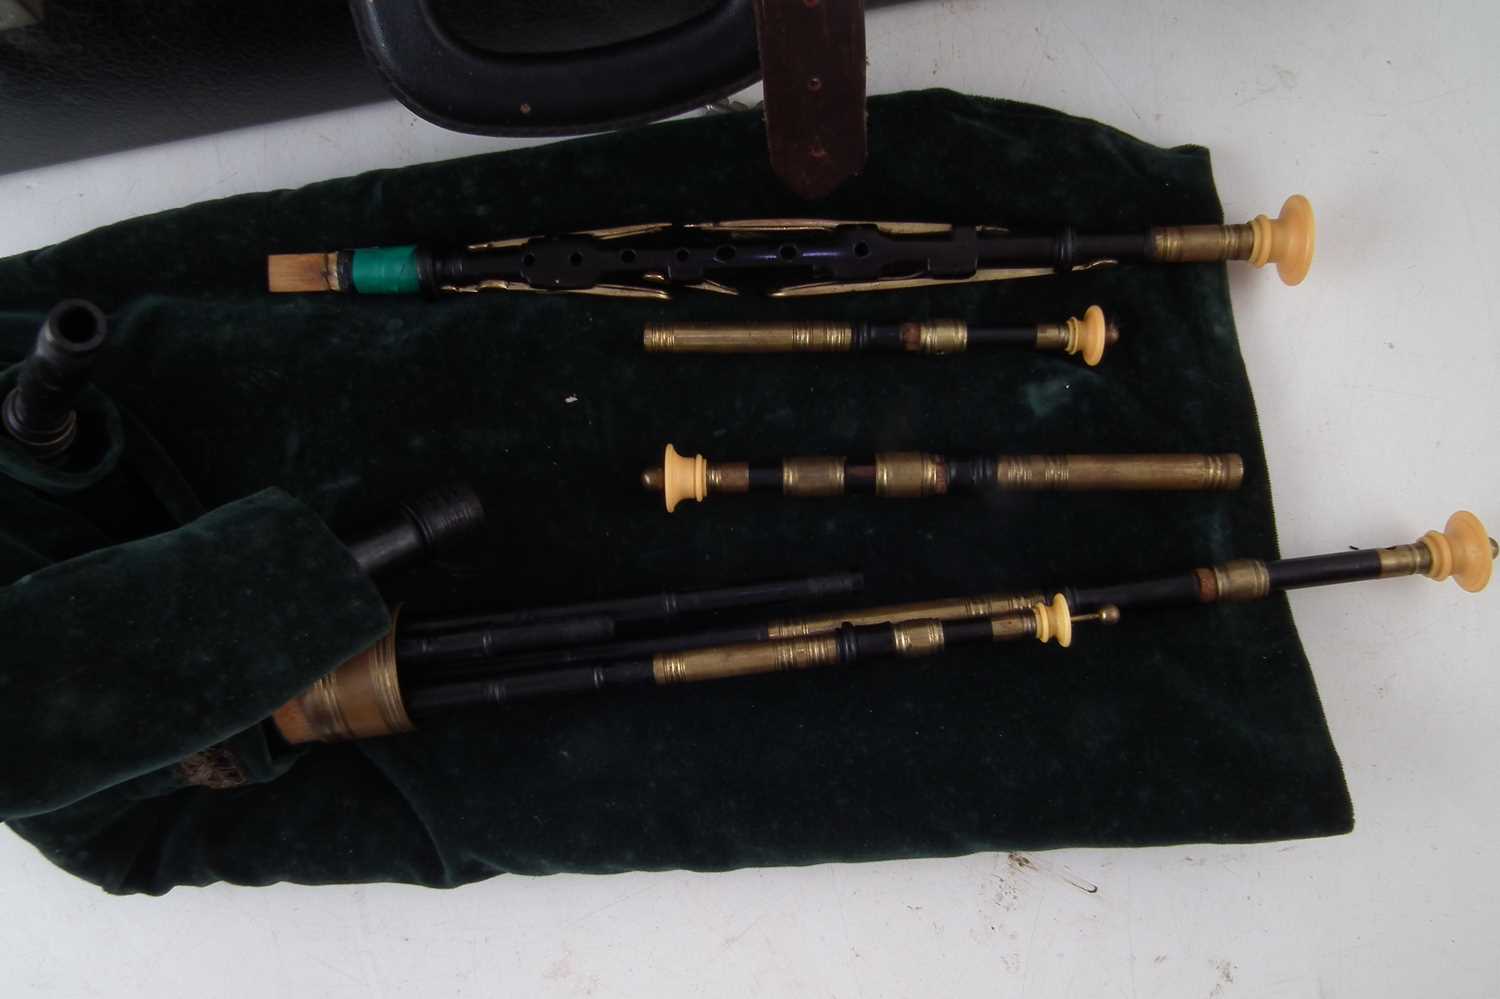 Cased set of Northumbrian small pipes marked Burleigh S44 - Image 2 of 4